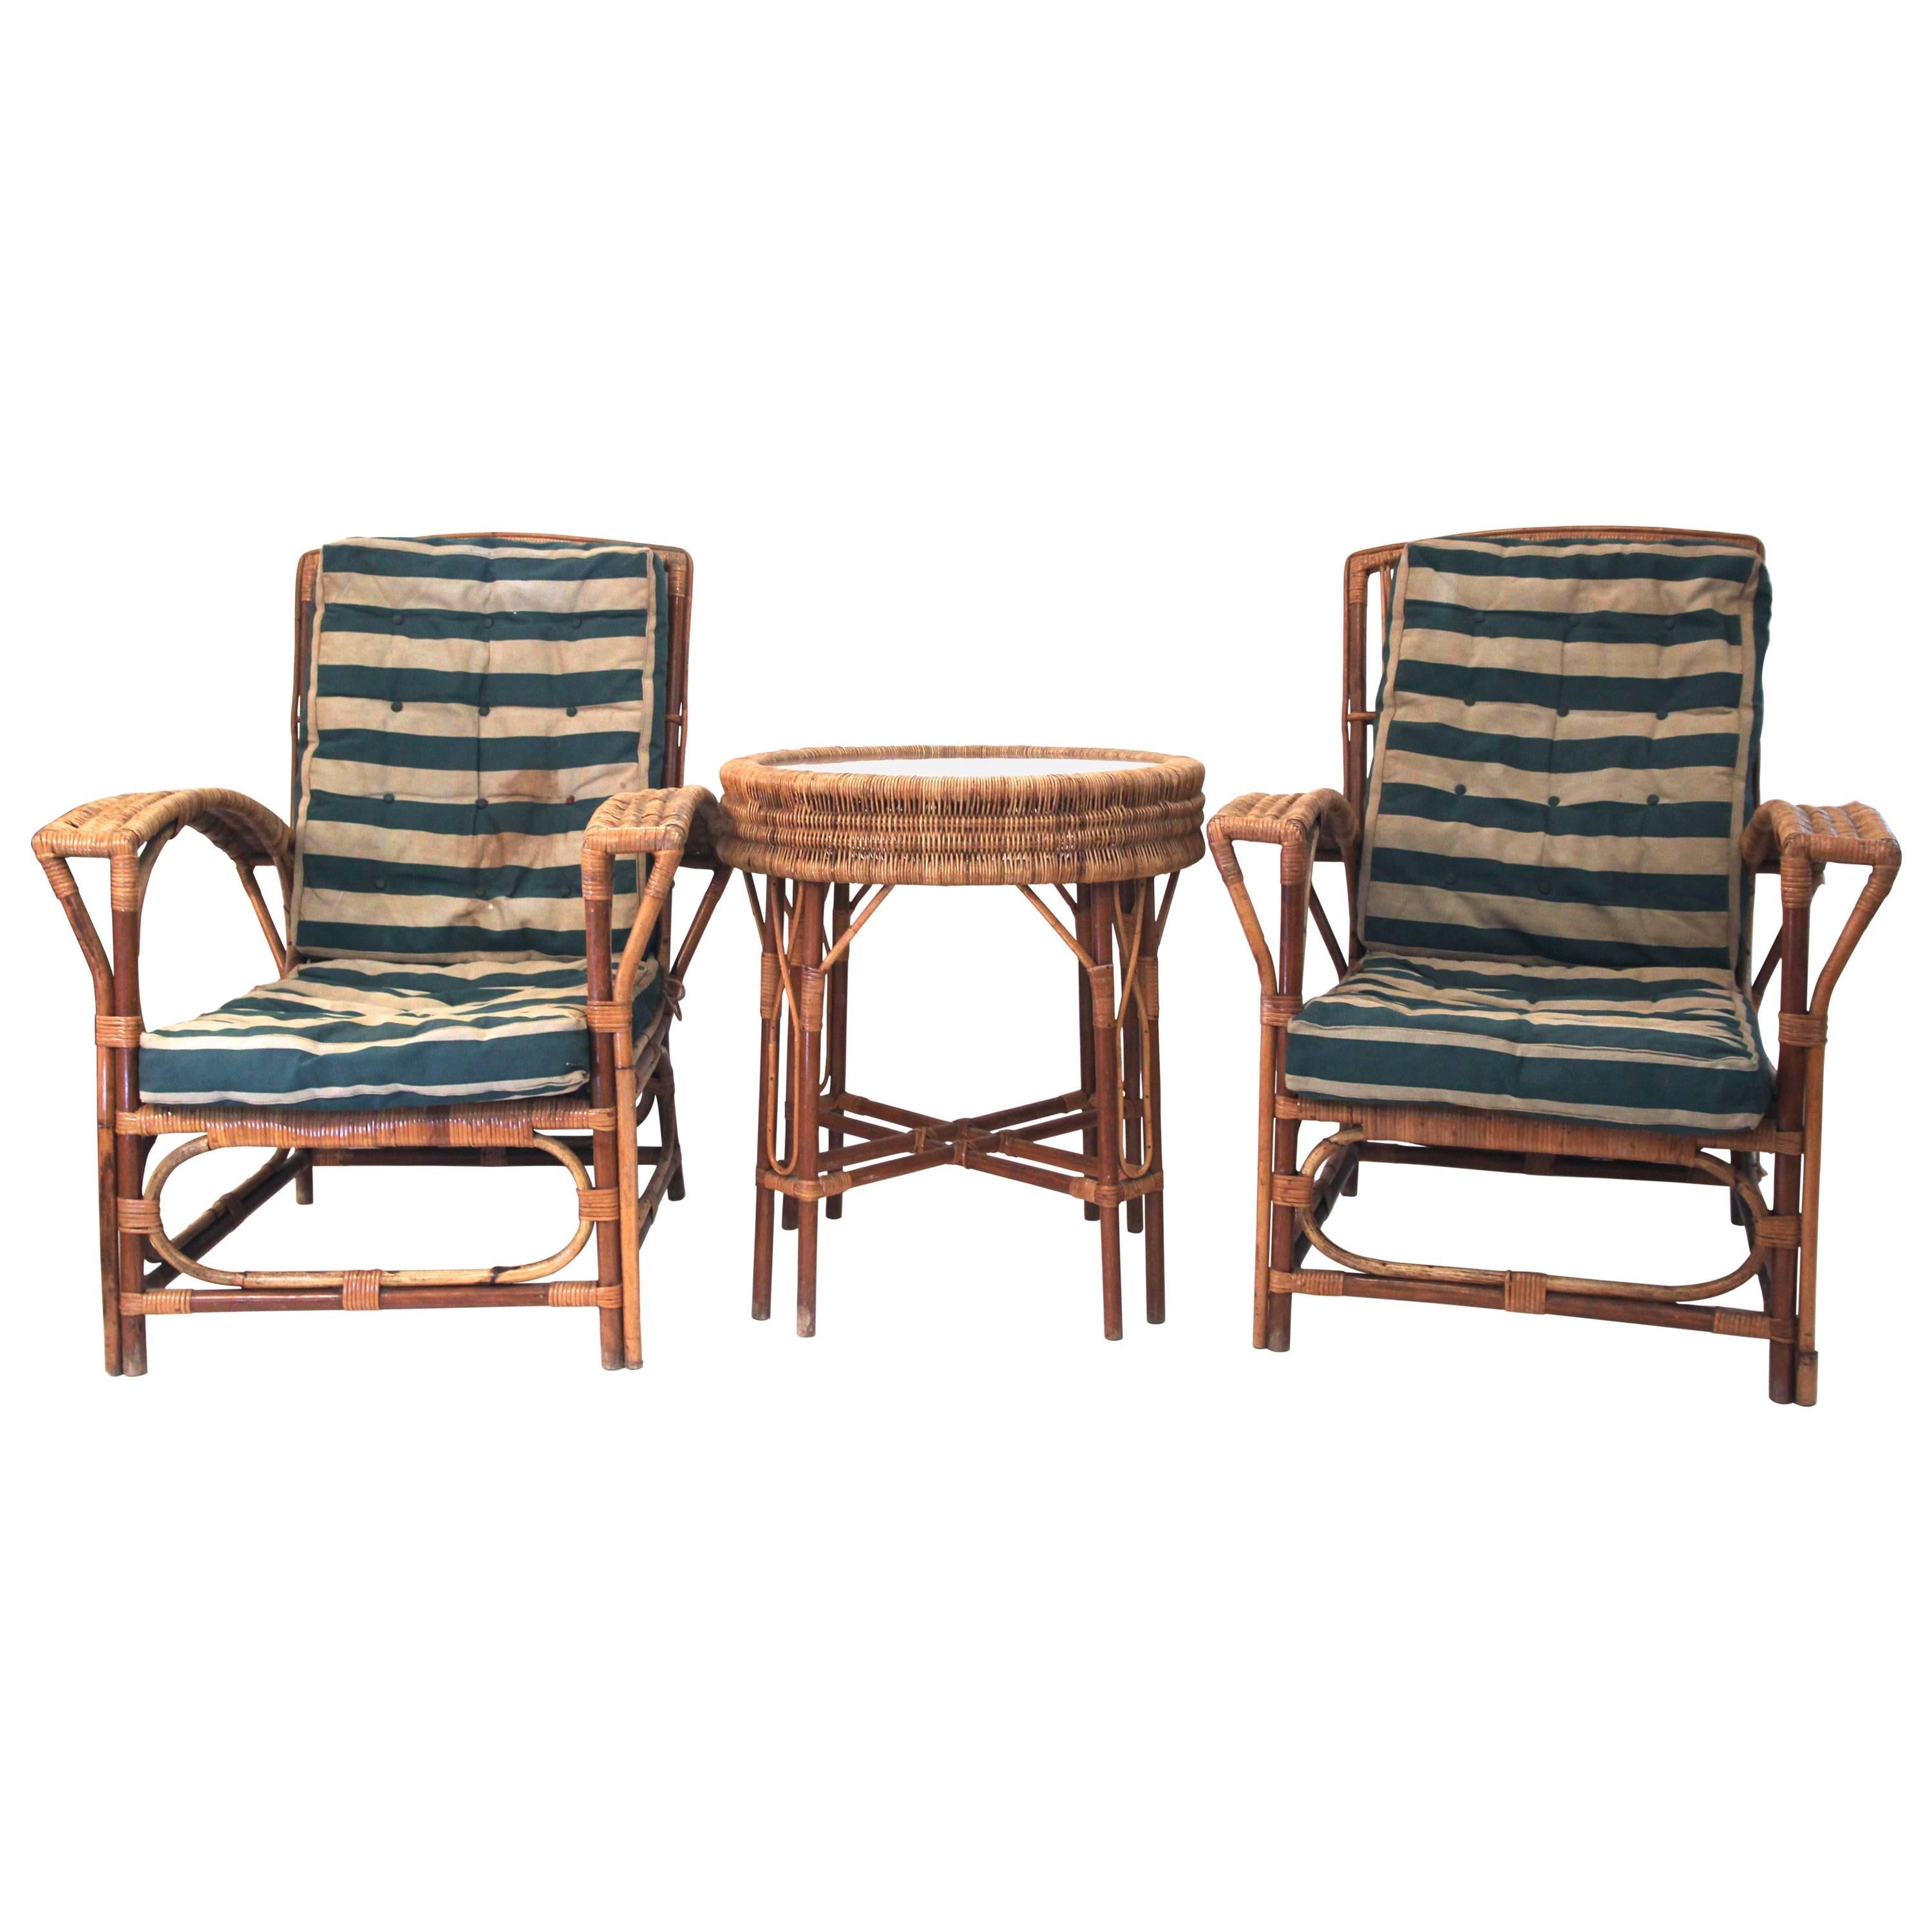 Set of Four Chairs and Center Table, Rattan, circa 1960, France